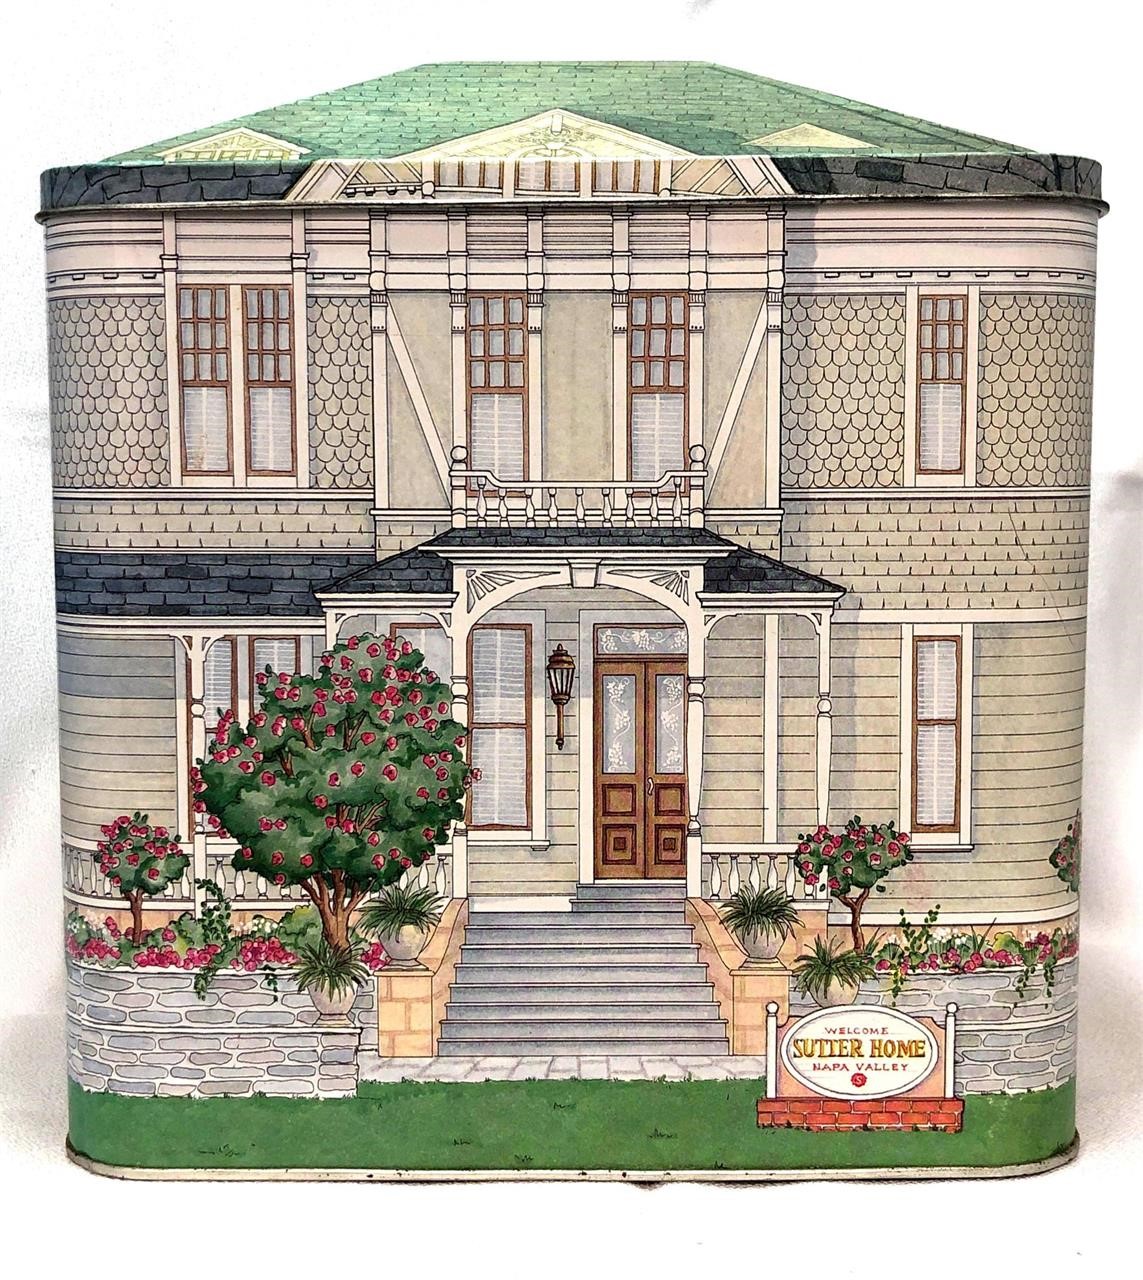 Sutter Home Winery's Napa Valley Victorian Tin